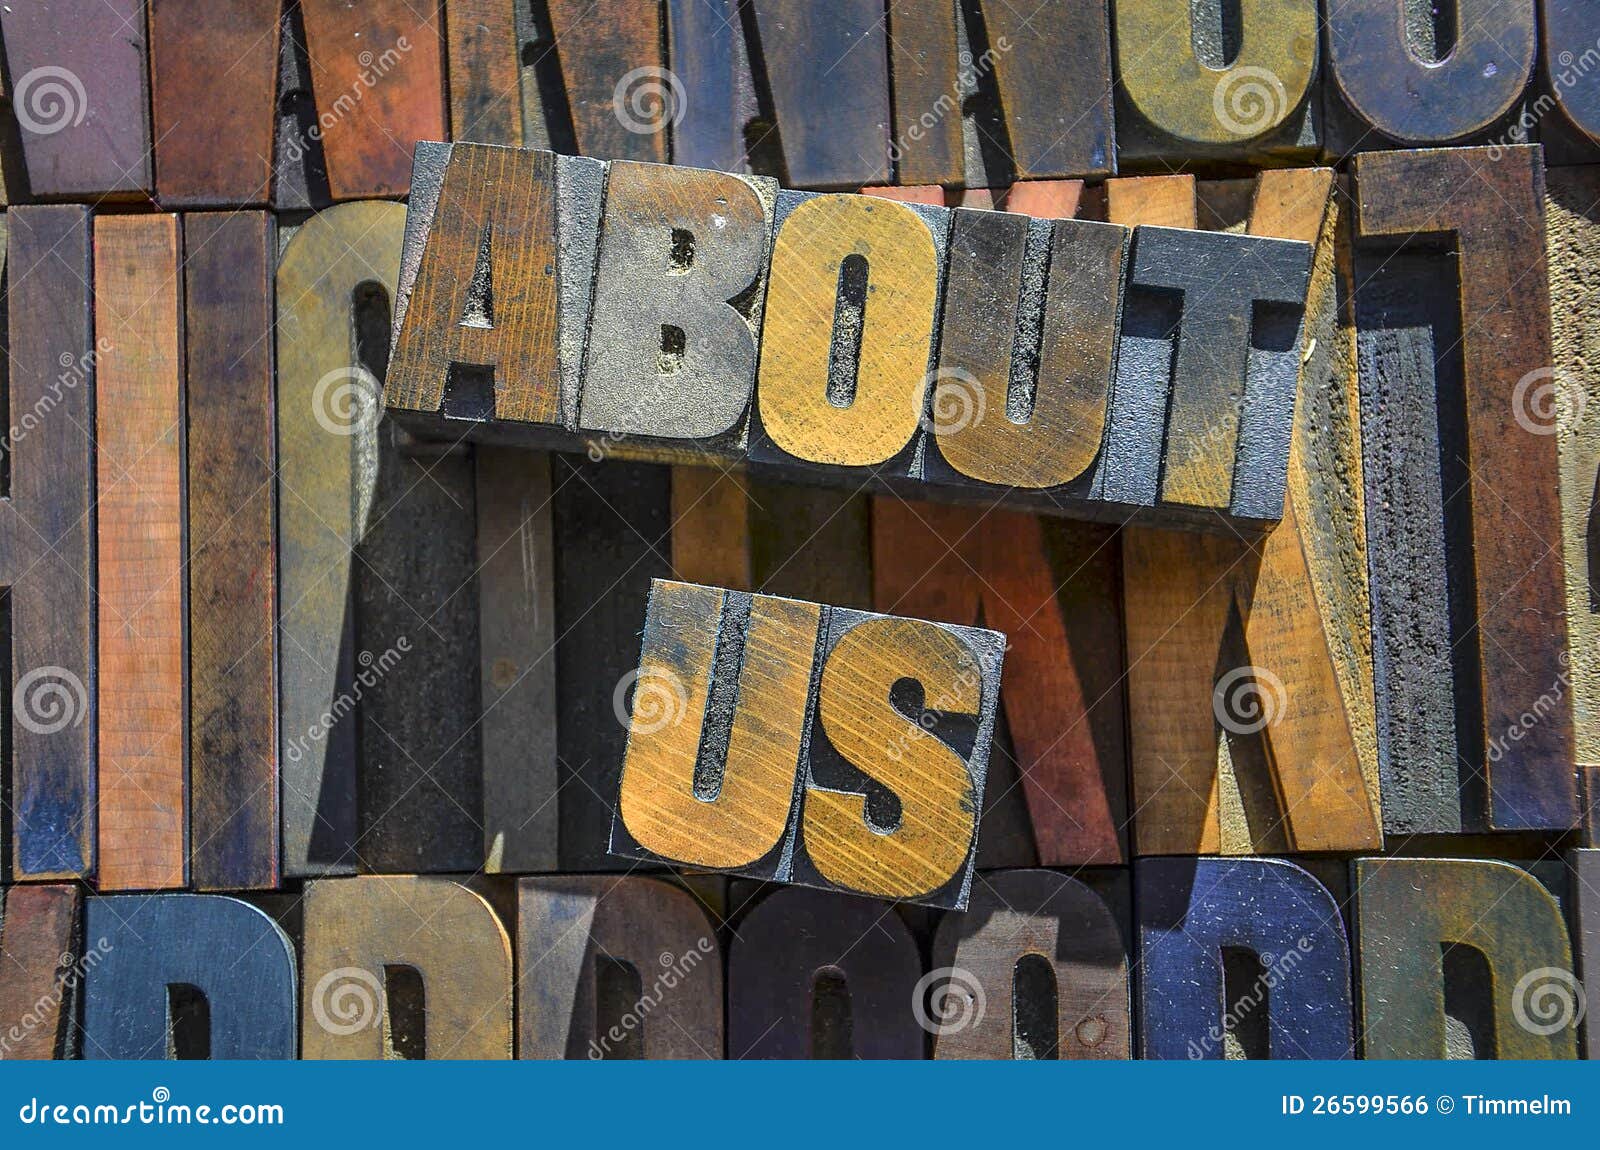 about us wooden typeset